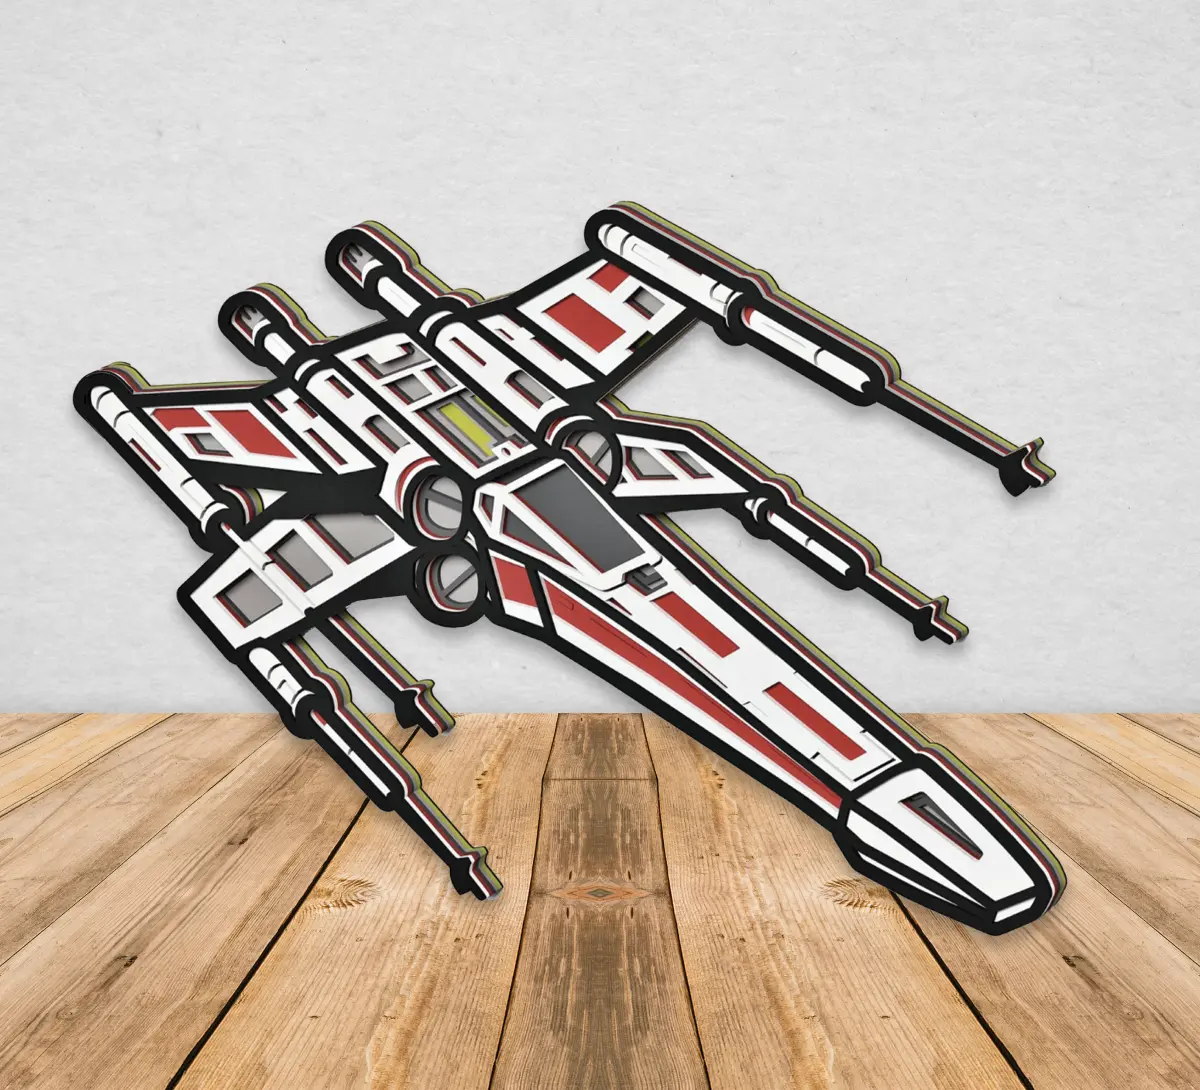 X-Wing Star Wars interior Laser Engraved 2-D Interior Home Decor Office Gift Angel Tree Designs